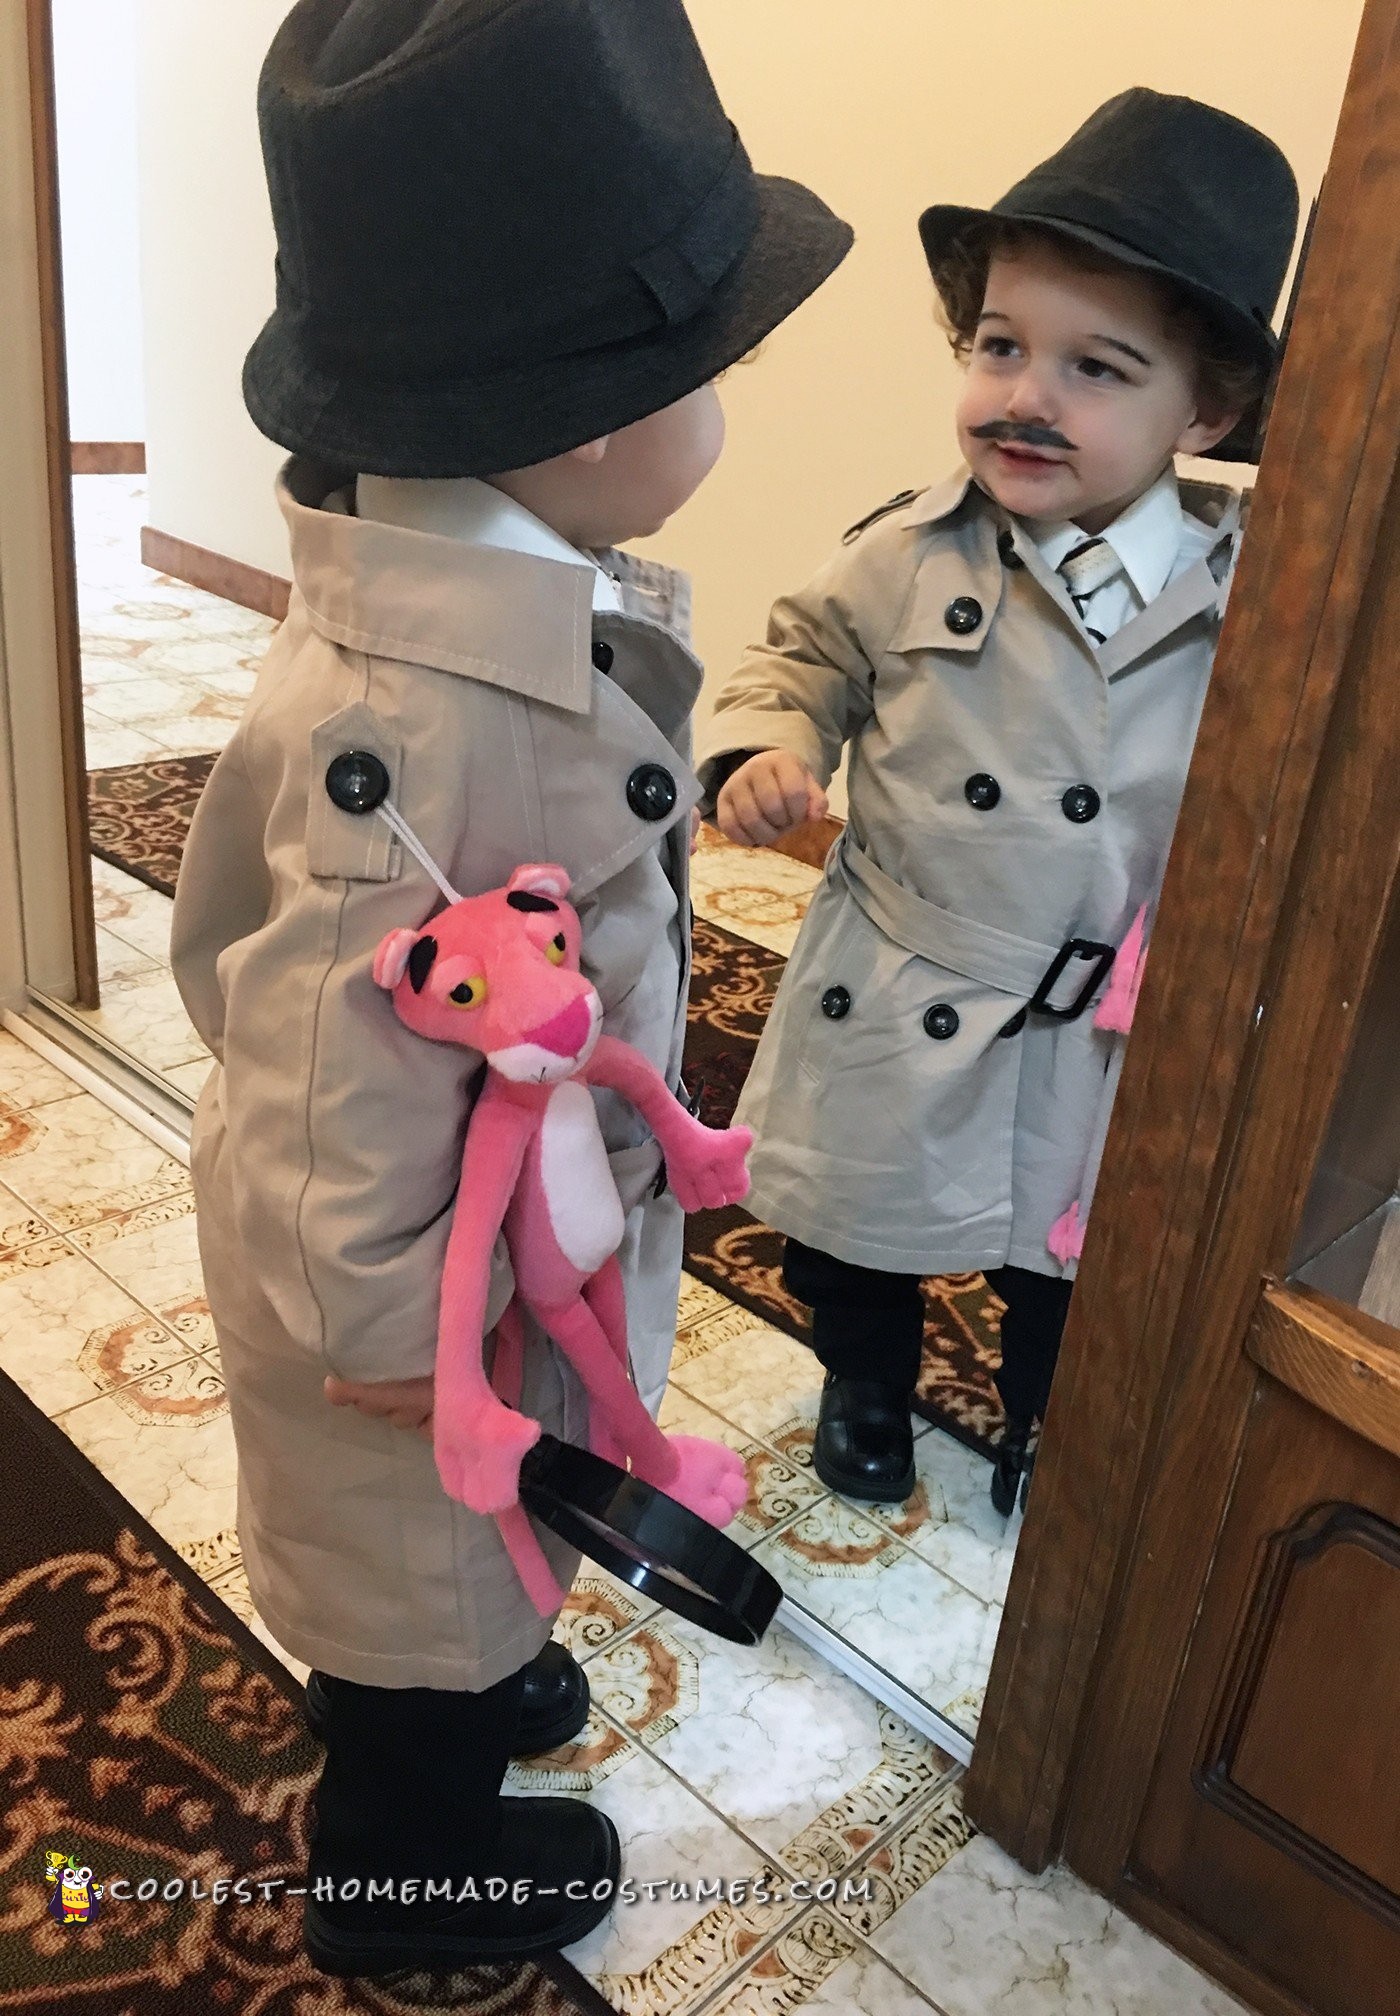 Cool Inspector Jacques Clouseau Costume from The Pink Panther